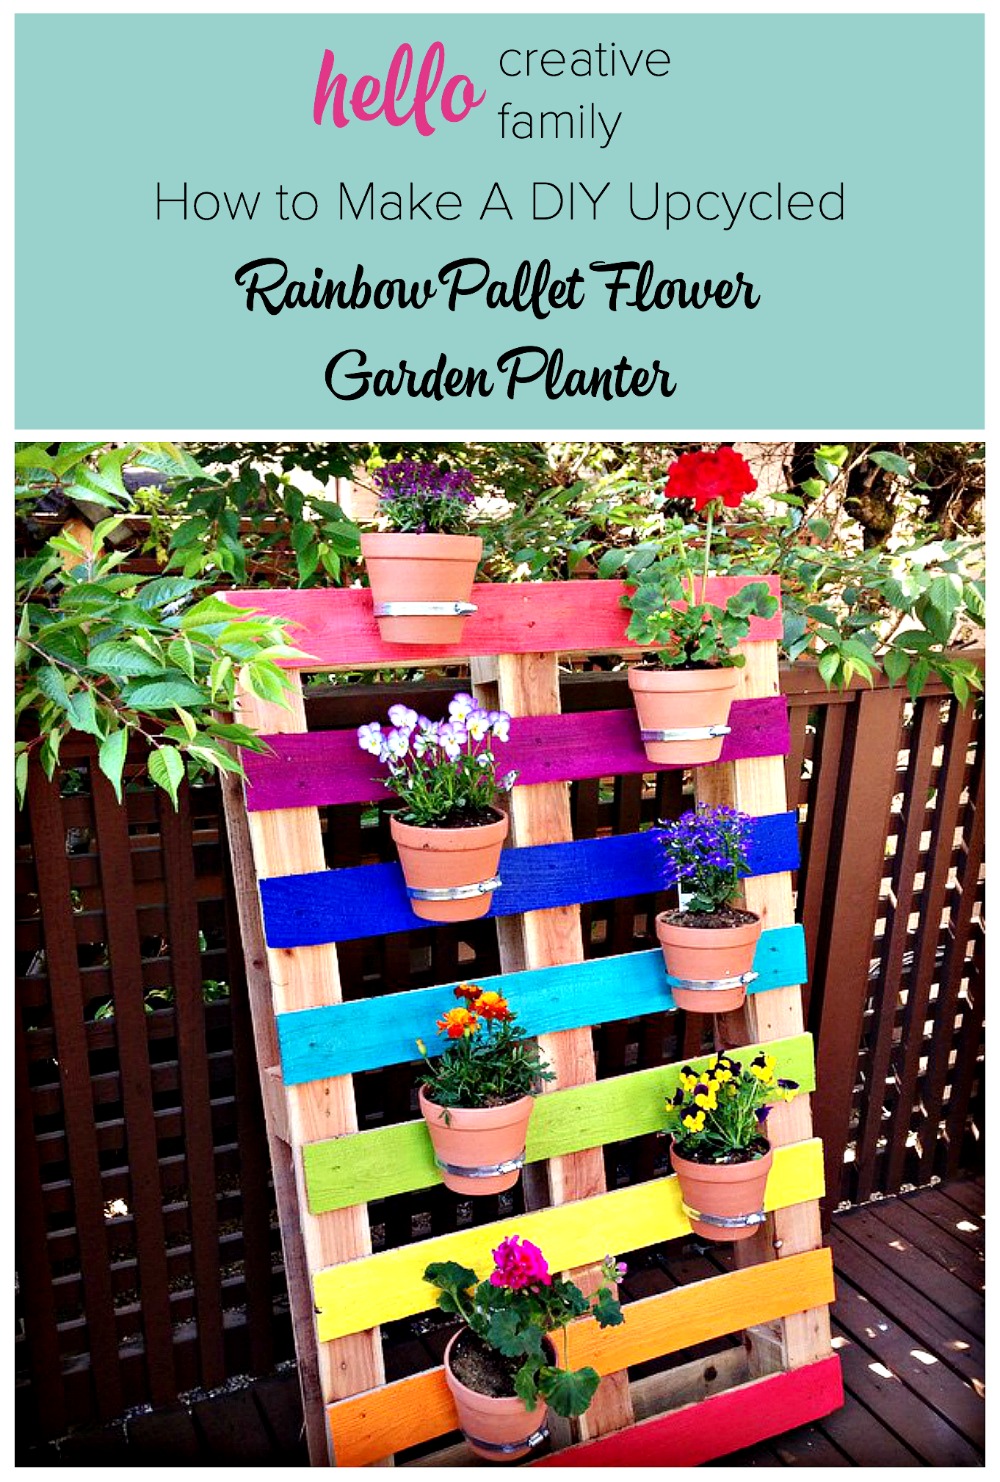 27 Rainbow Crafts, DIY Projects and Recipes Your Family